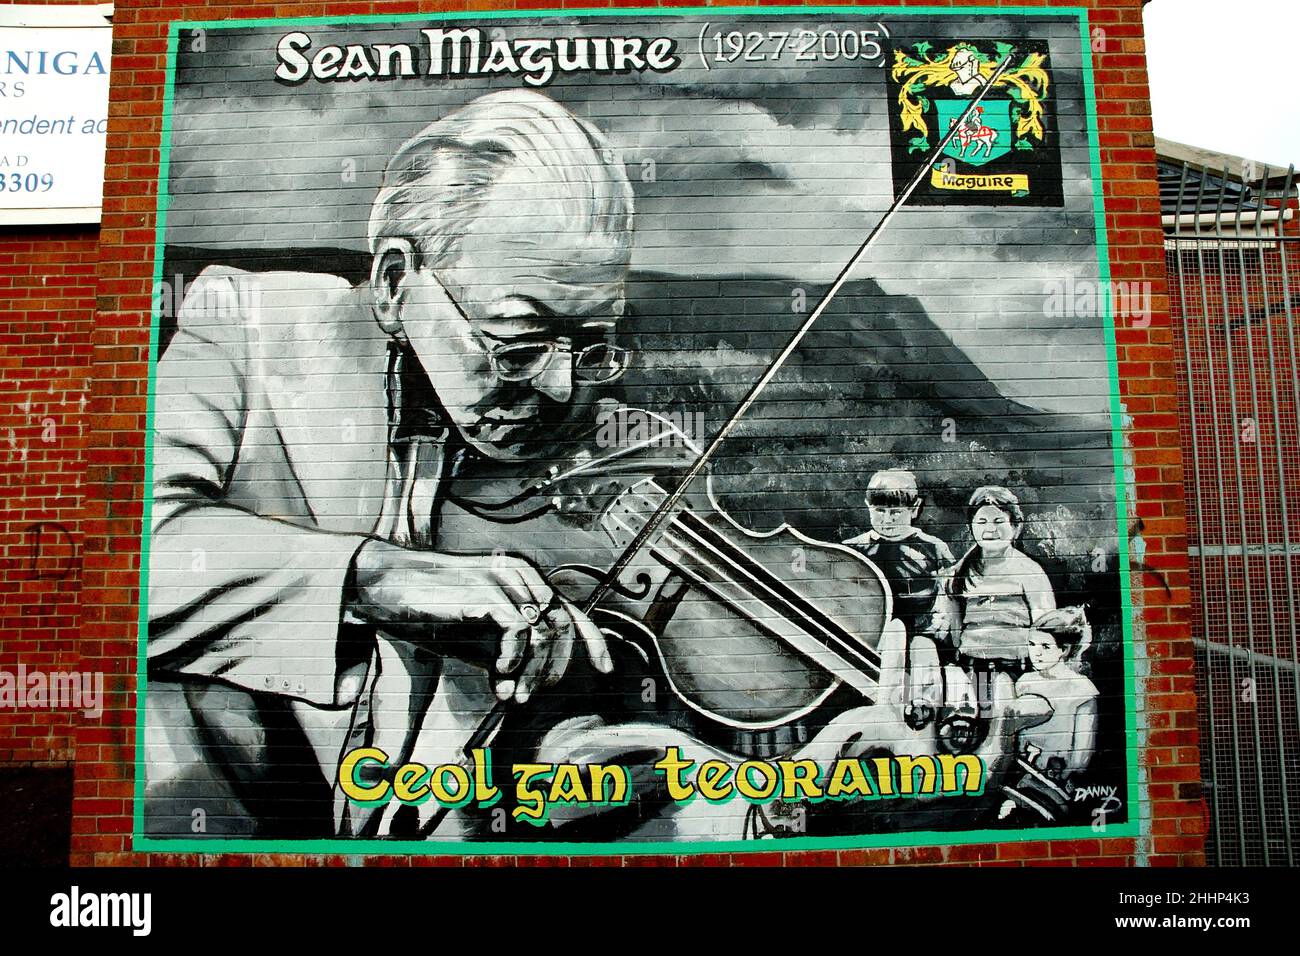 North Ireland. Ulster. Belfast. Falls road. Mural In the Catholic district in memory of fiddler Sean Maguire, champion of gaelic culture. Stock Photo